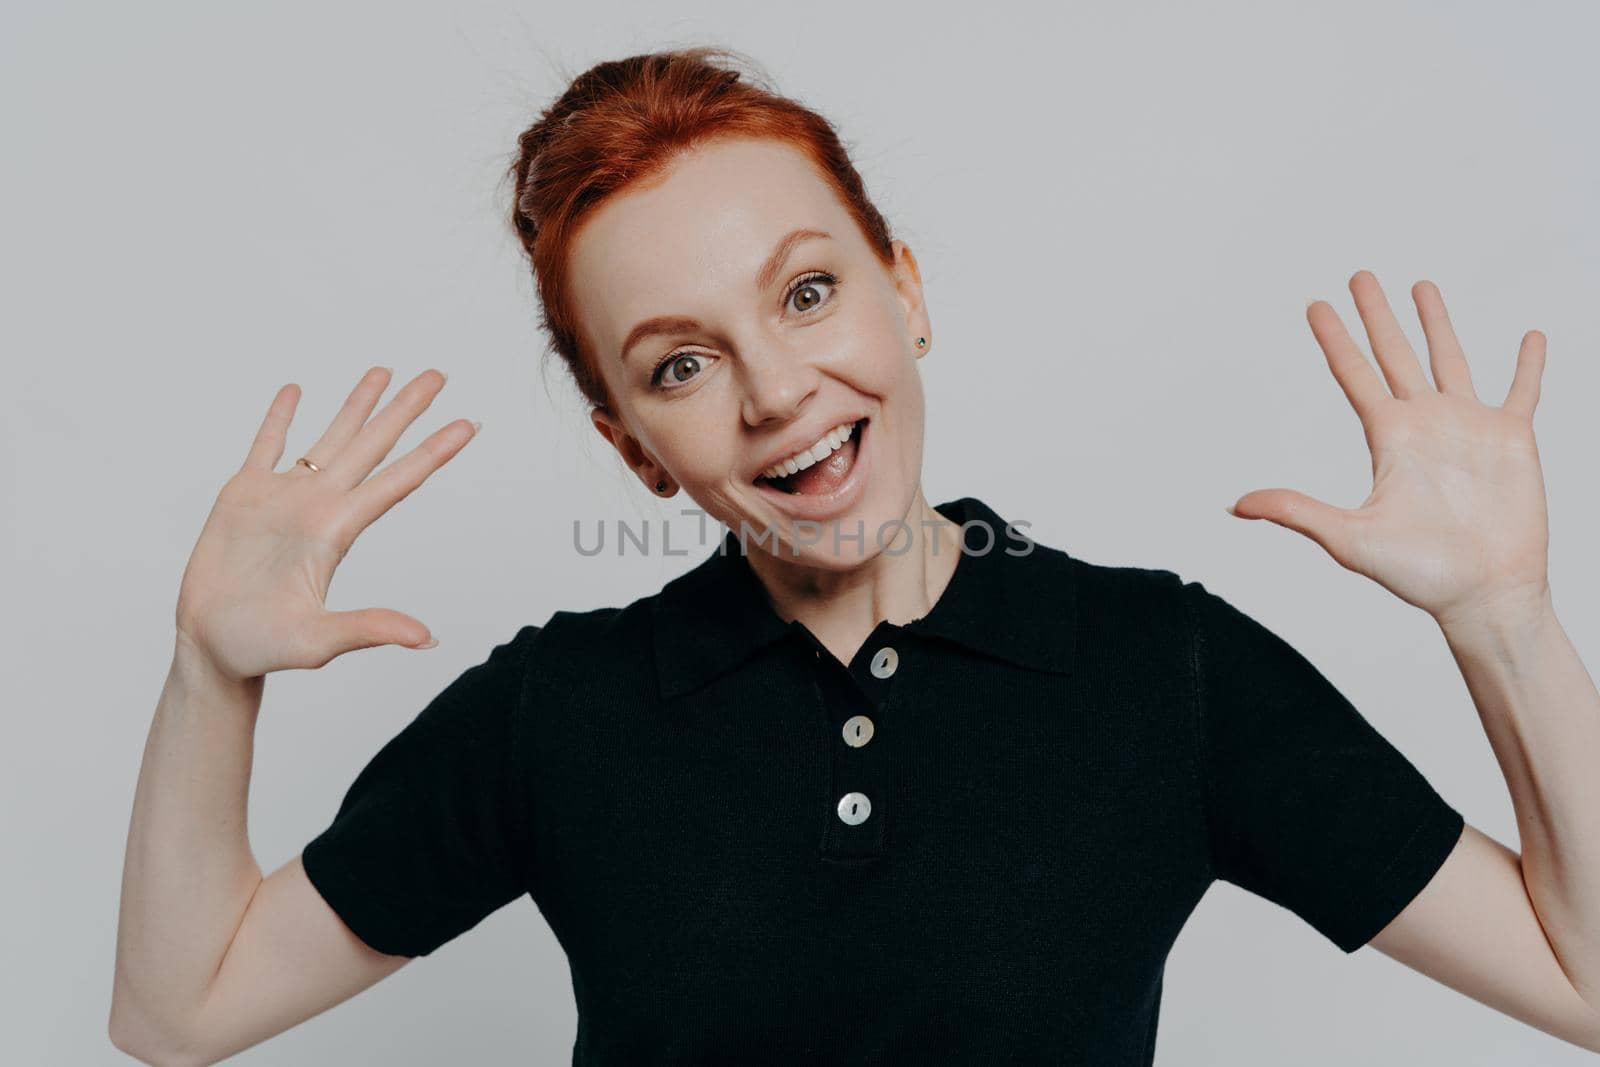 Portrait of young amused redhead woman raising palms and looking at camera with cheerful expression, excited ginger female seeing something funny, wearing black t-shirt, isolated on grey background